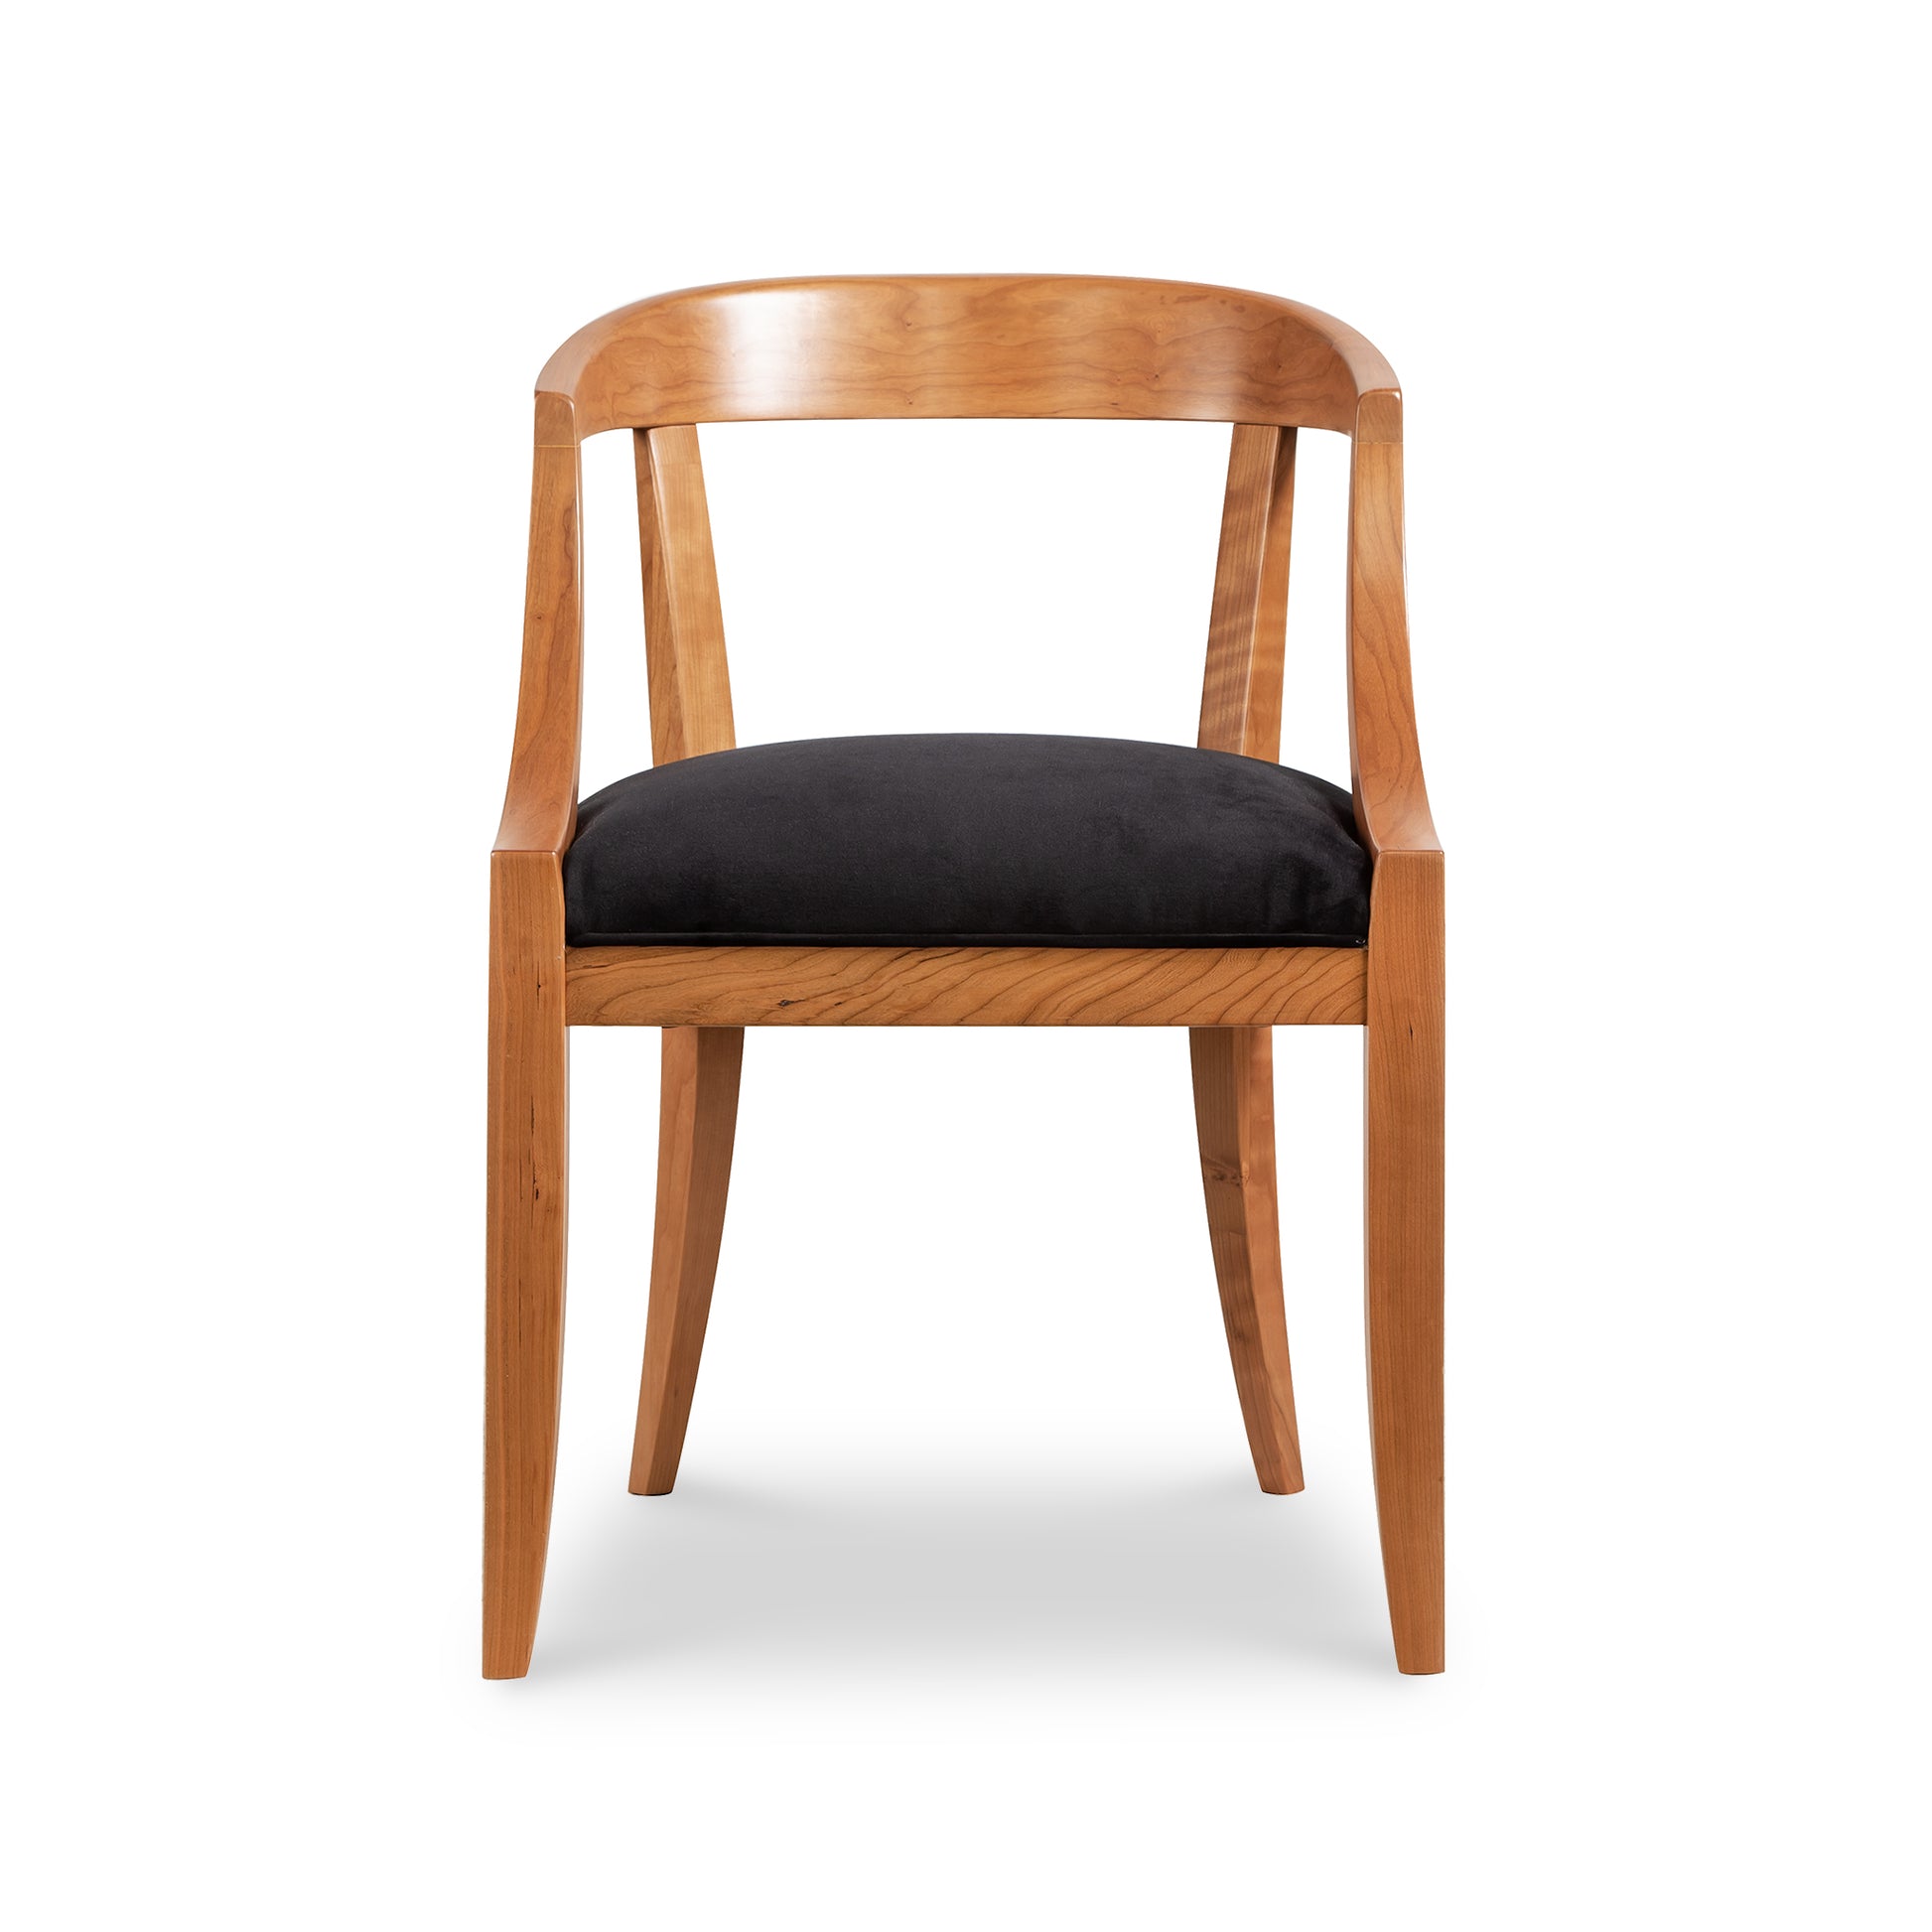 A wooden chair with black upholstered seat.